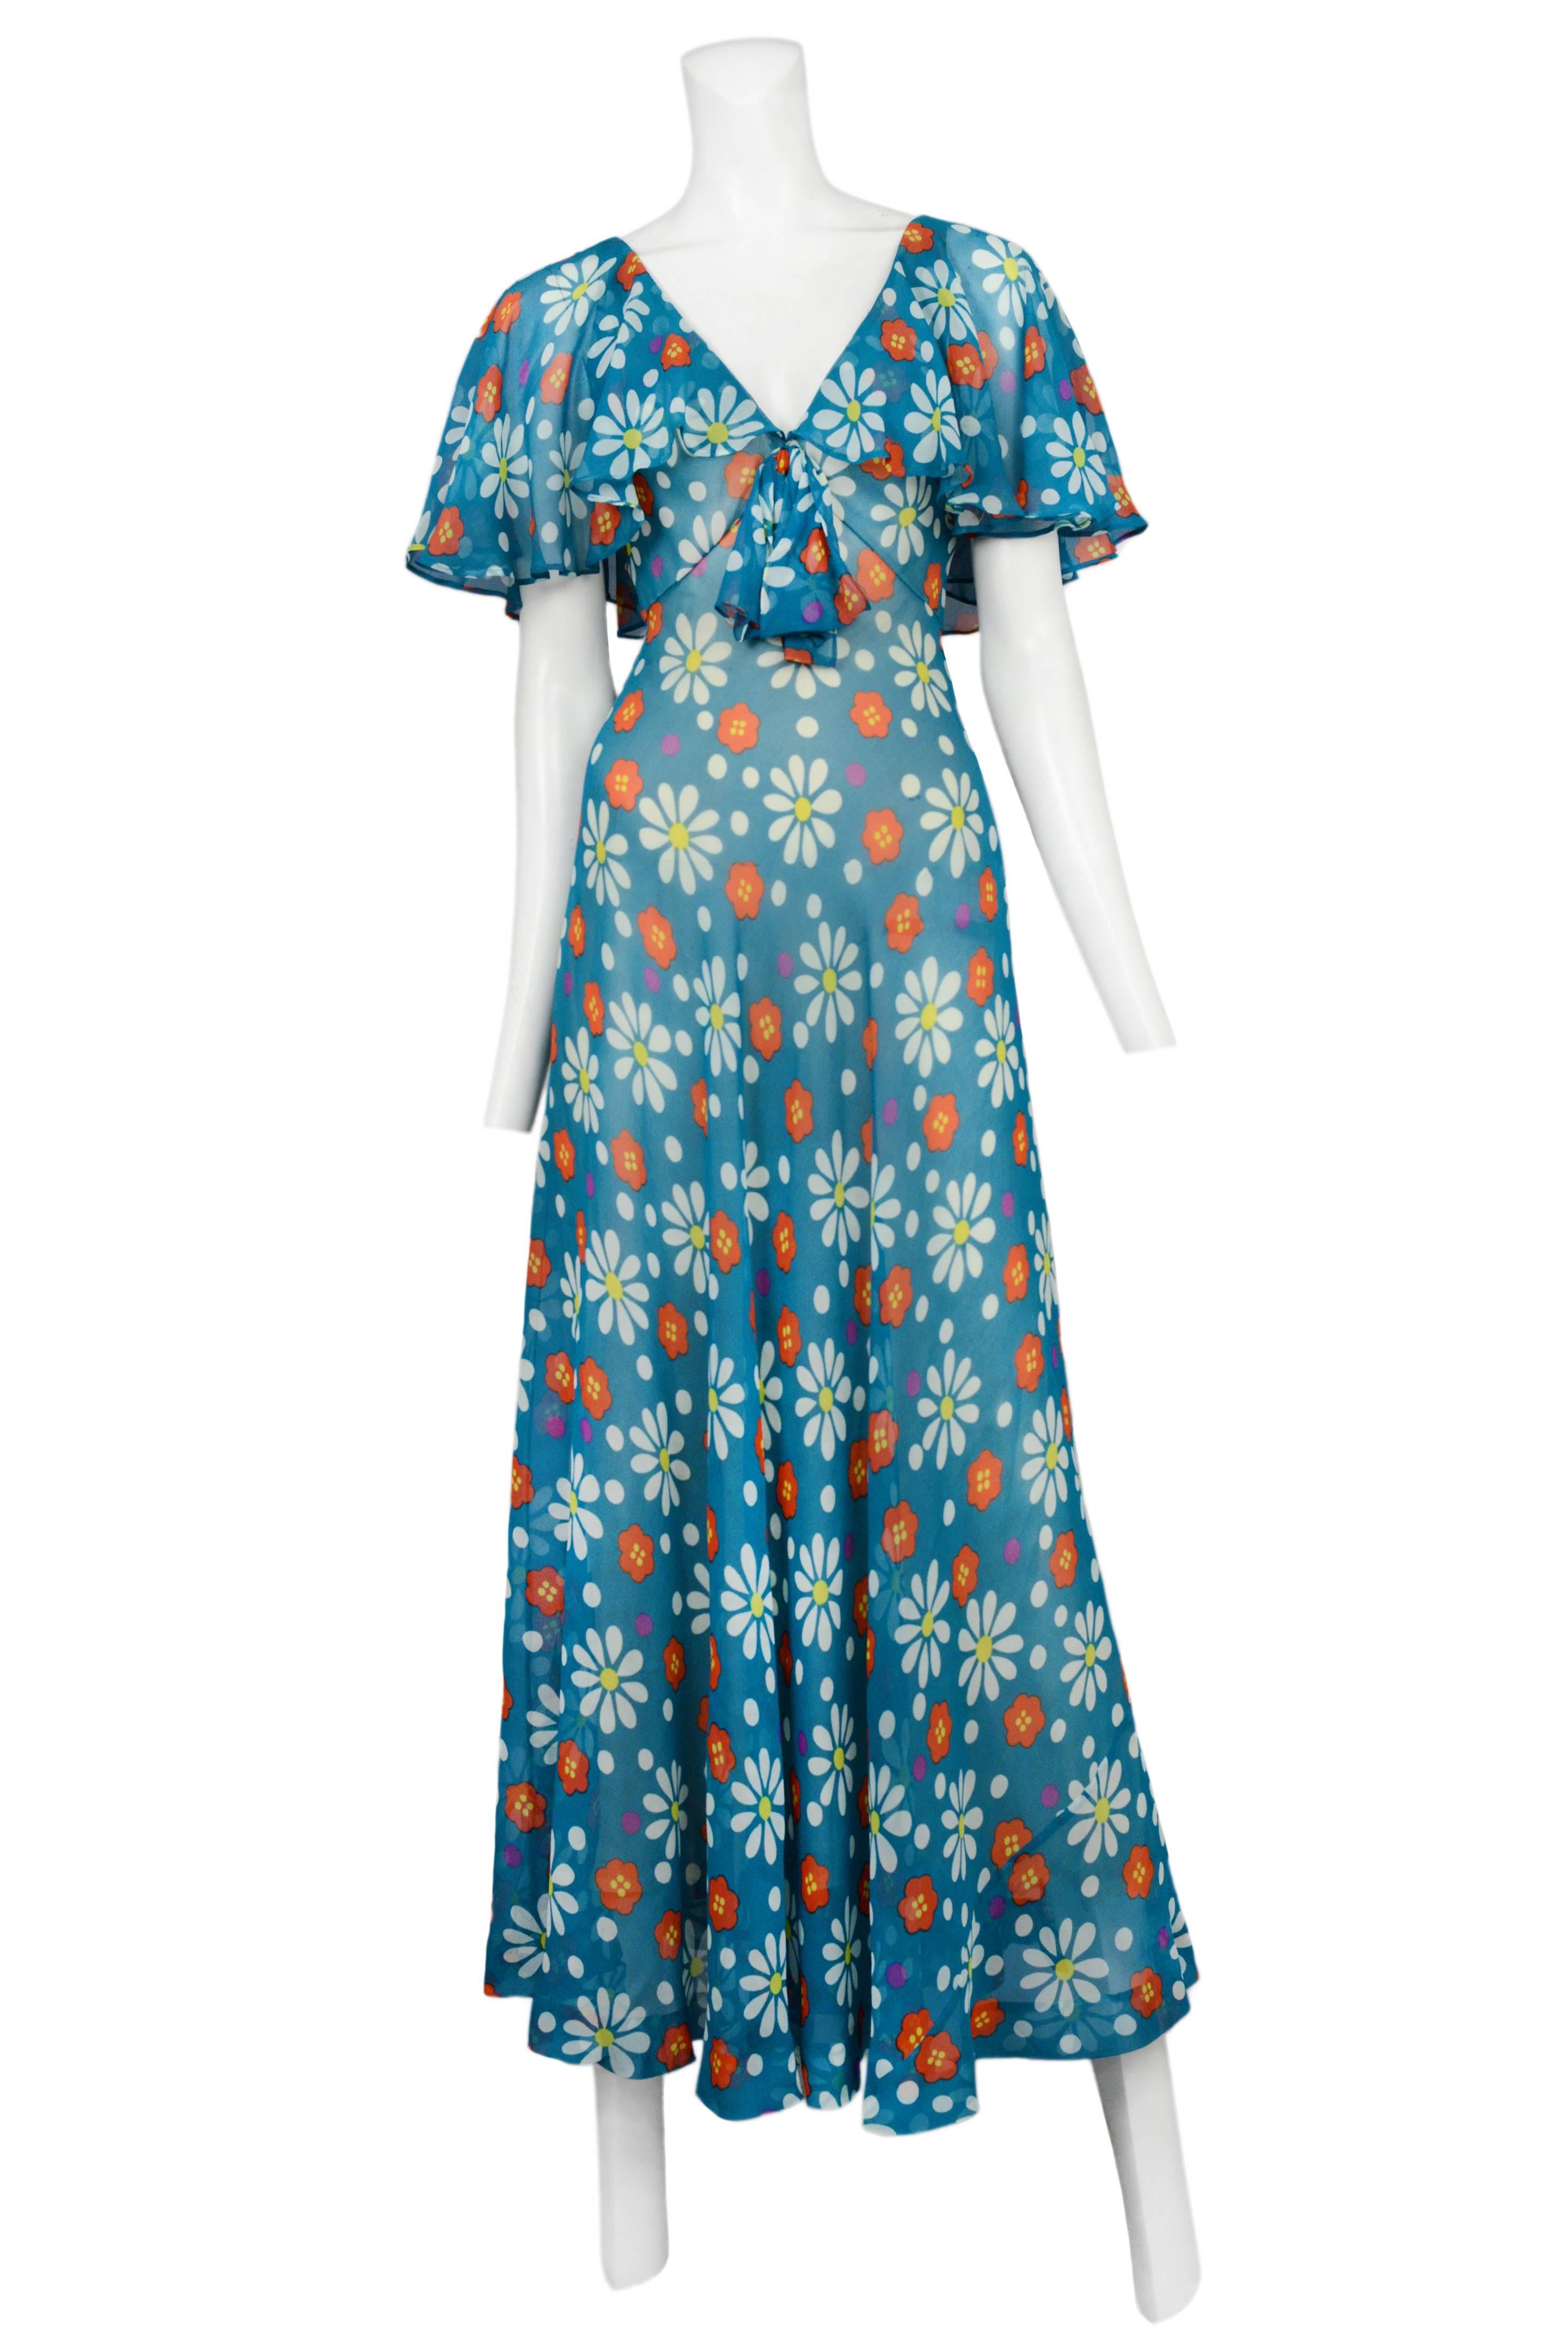 Vintage Yves Saint Laurent full length teal bohemian gown featuring an empire waist line, a tied bow under the bust, flutter sleeves and an allover daisy print.
Please inquire for additional images.